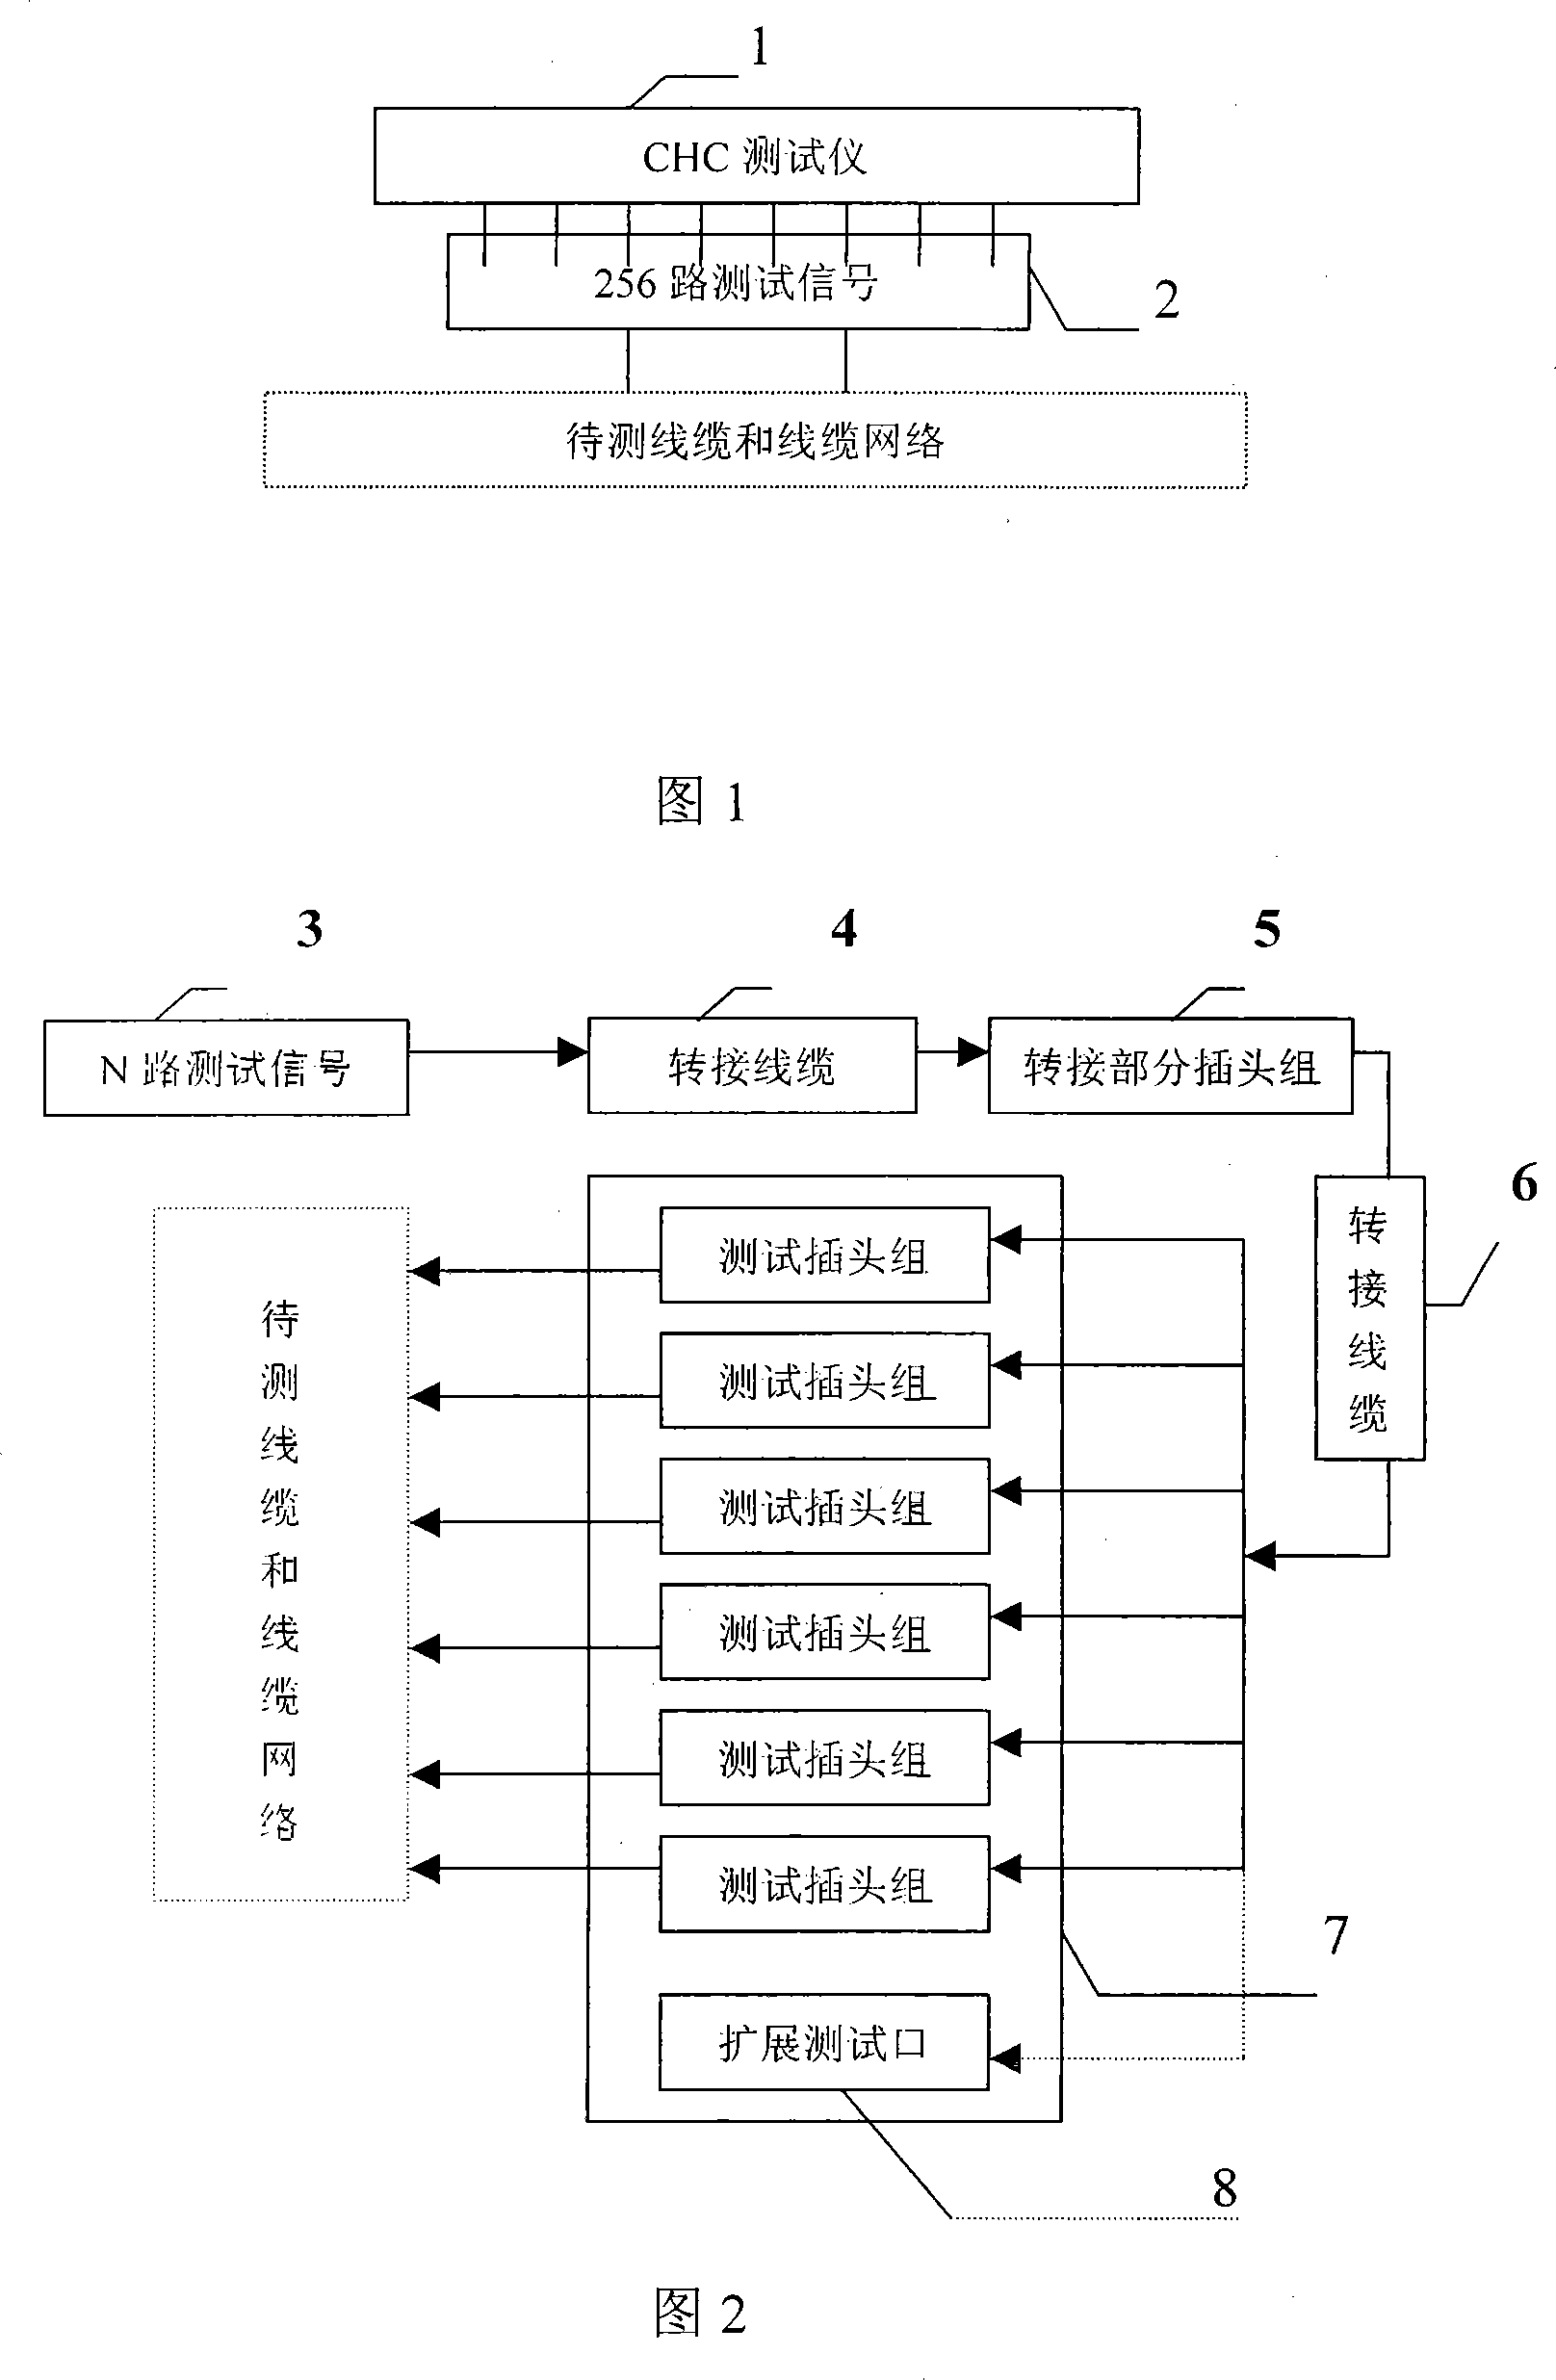 Switching device for detecting electrical cable network switching, insulating and overpressure resistant performance